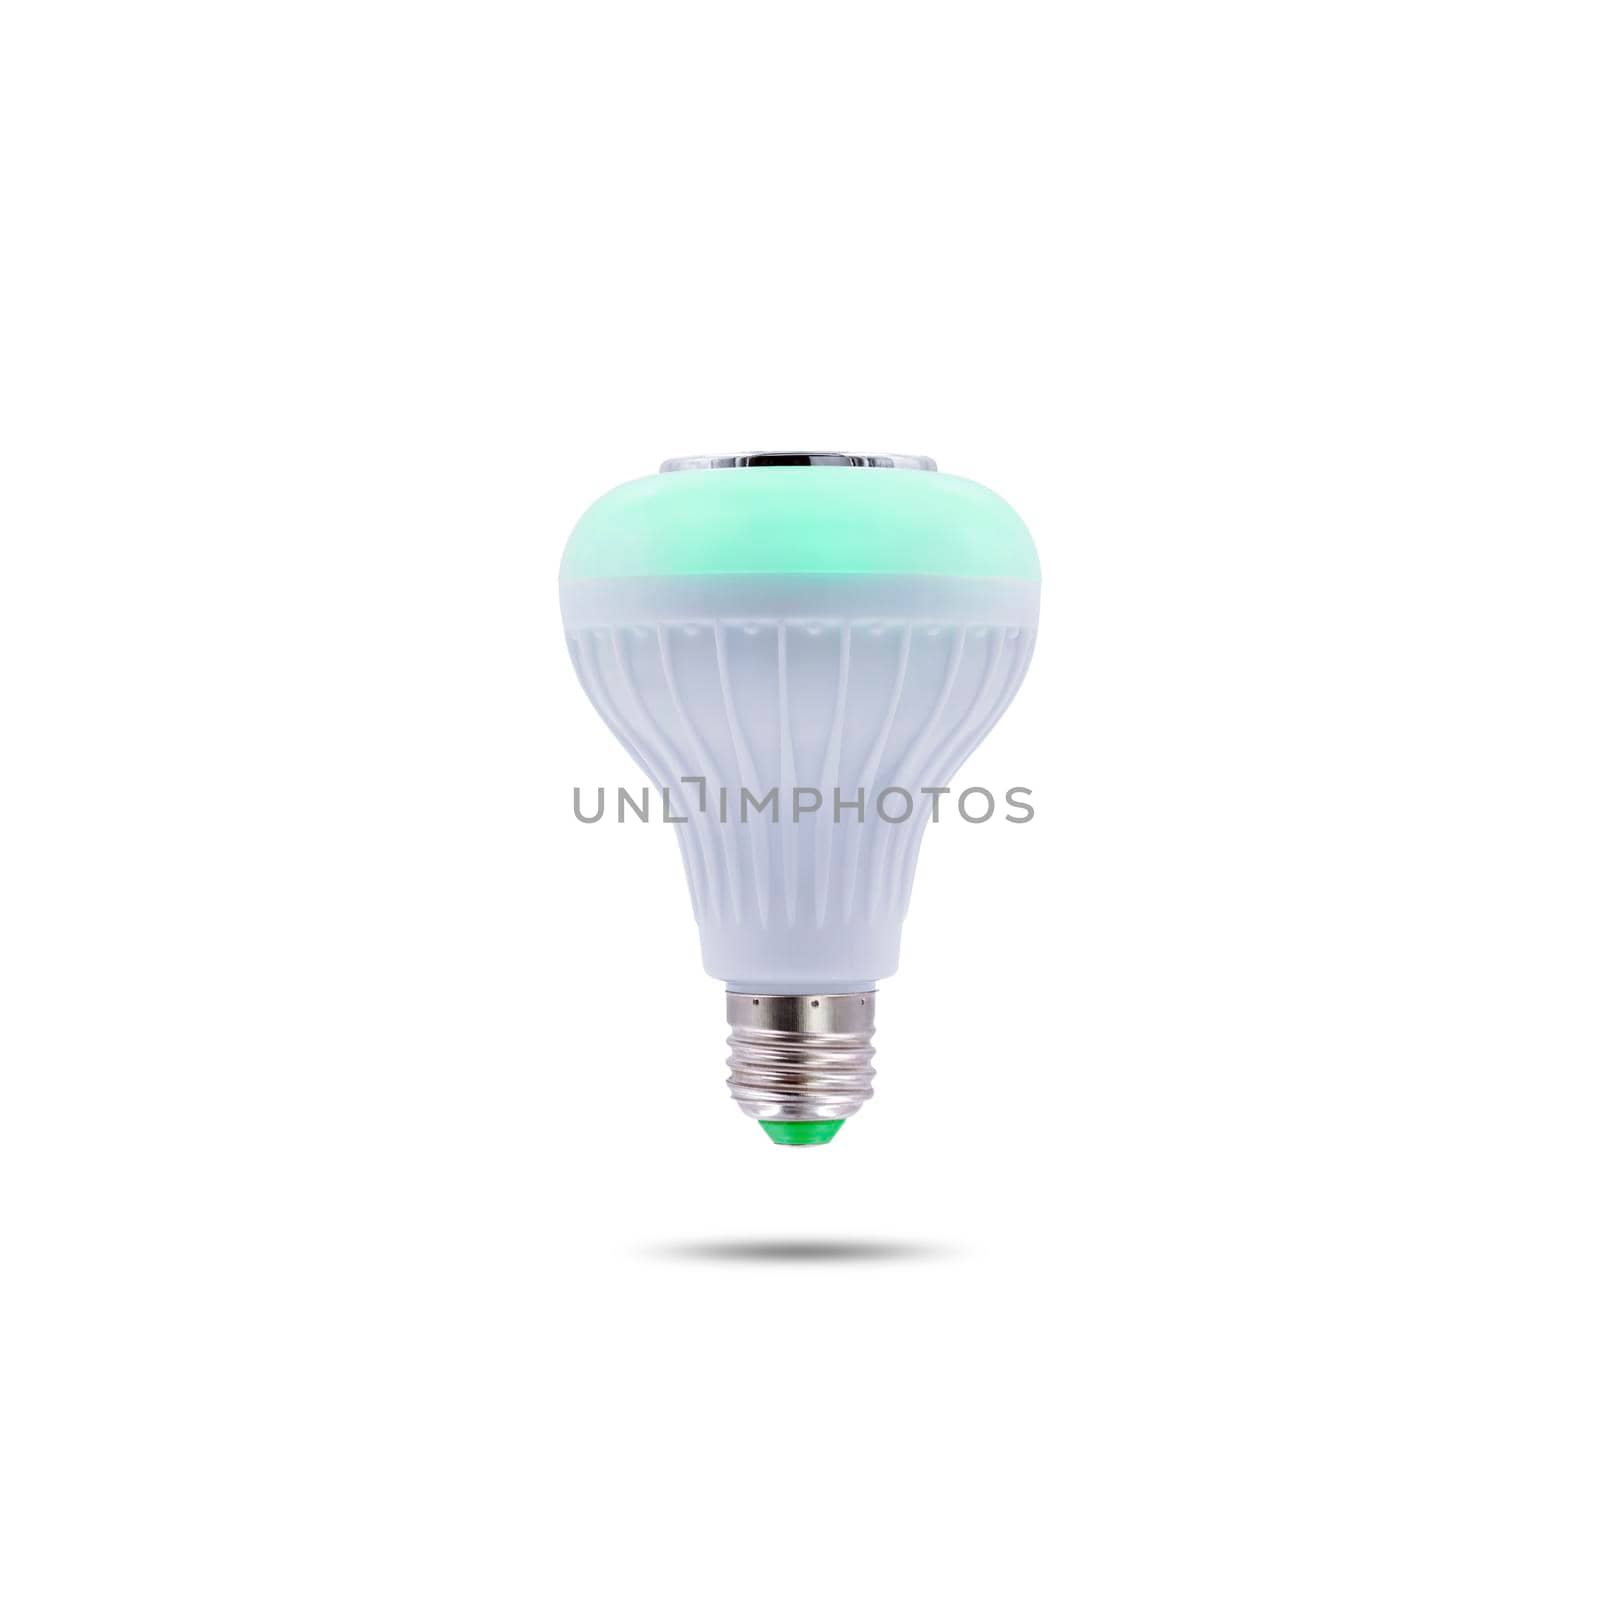 Multi colored LED flashing ceiling lighting with built-in wireless speaker isolated on white background. by wattanaphob